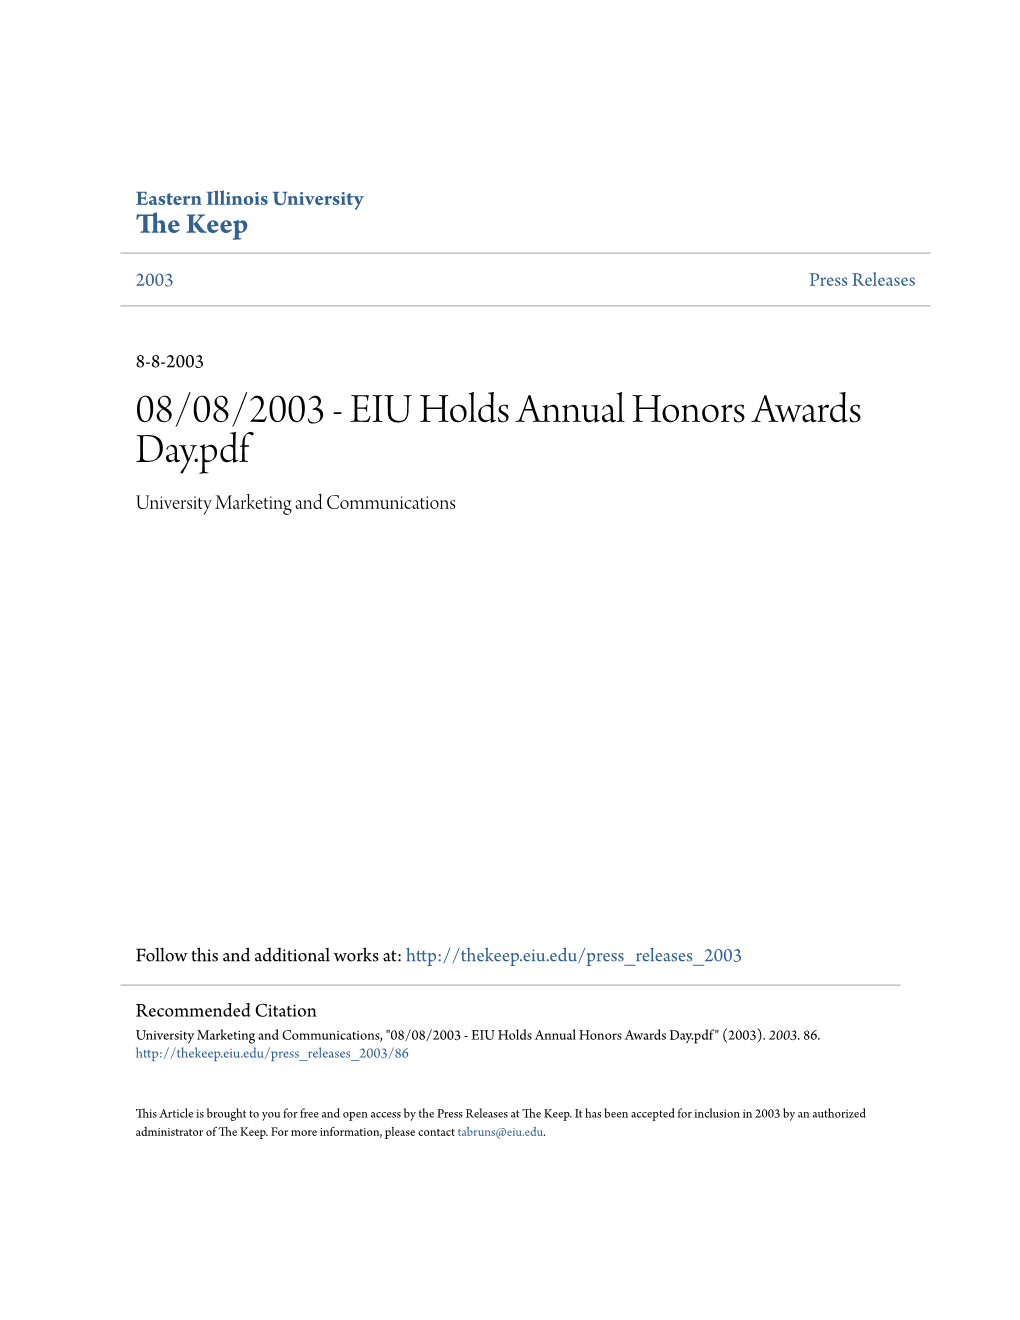 08/08/2003 - EIU Holds Annual Honors Awards Day.Pdf University Marketing and Communications